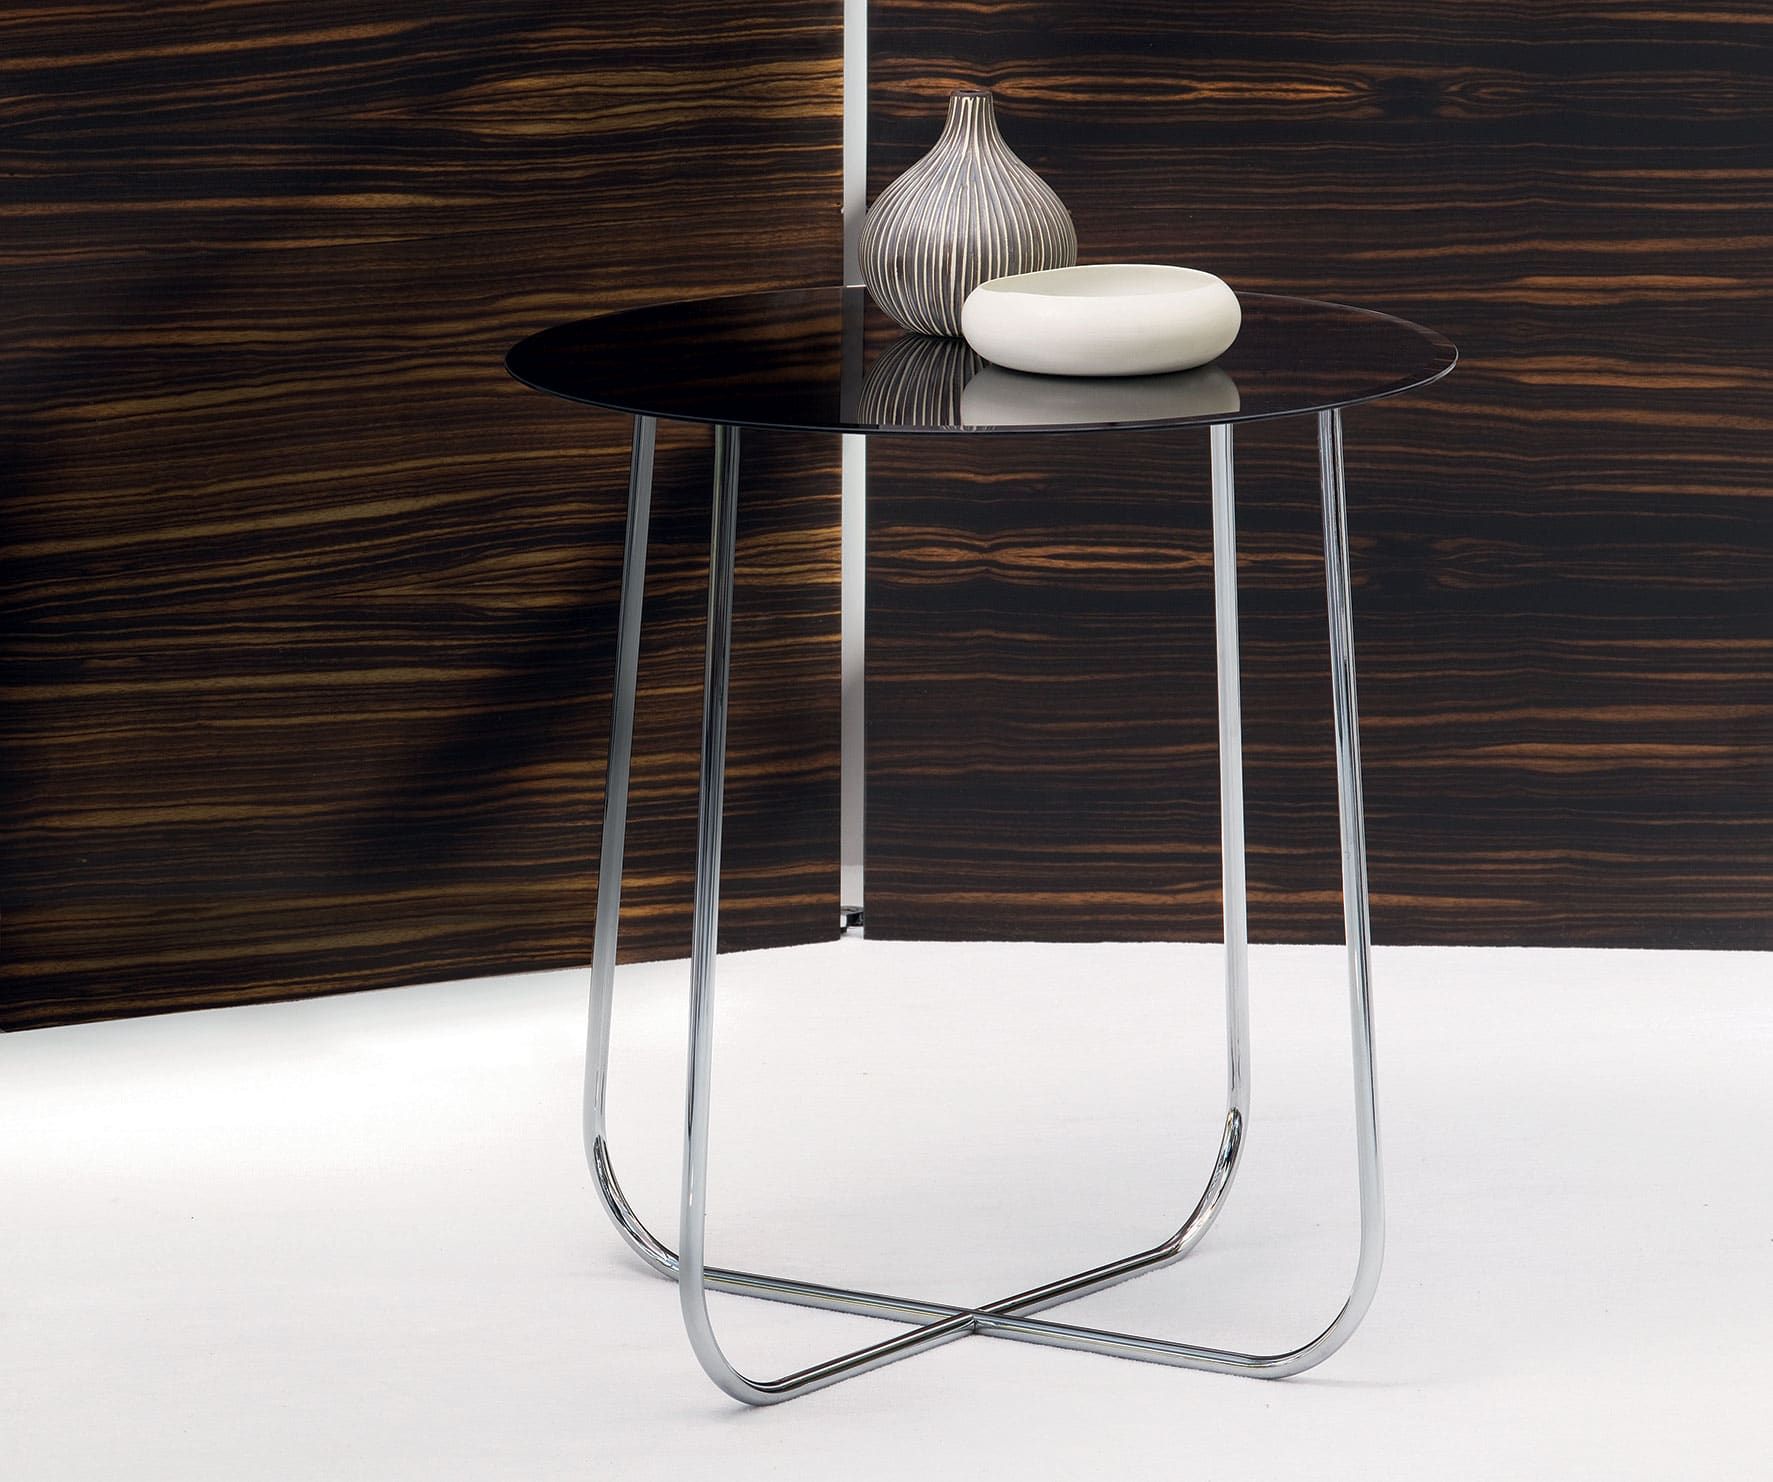 Violette modern Italian side table with black glass